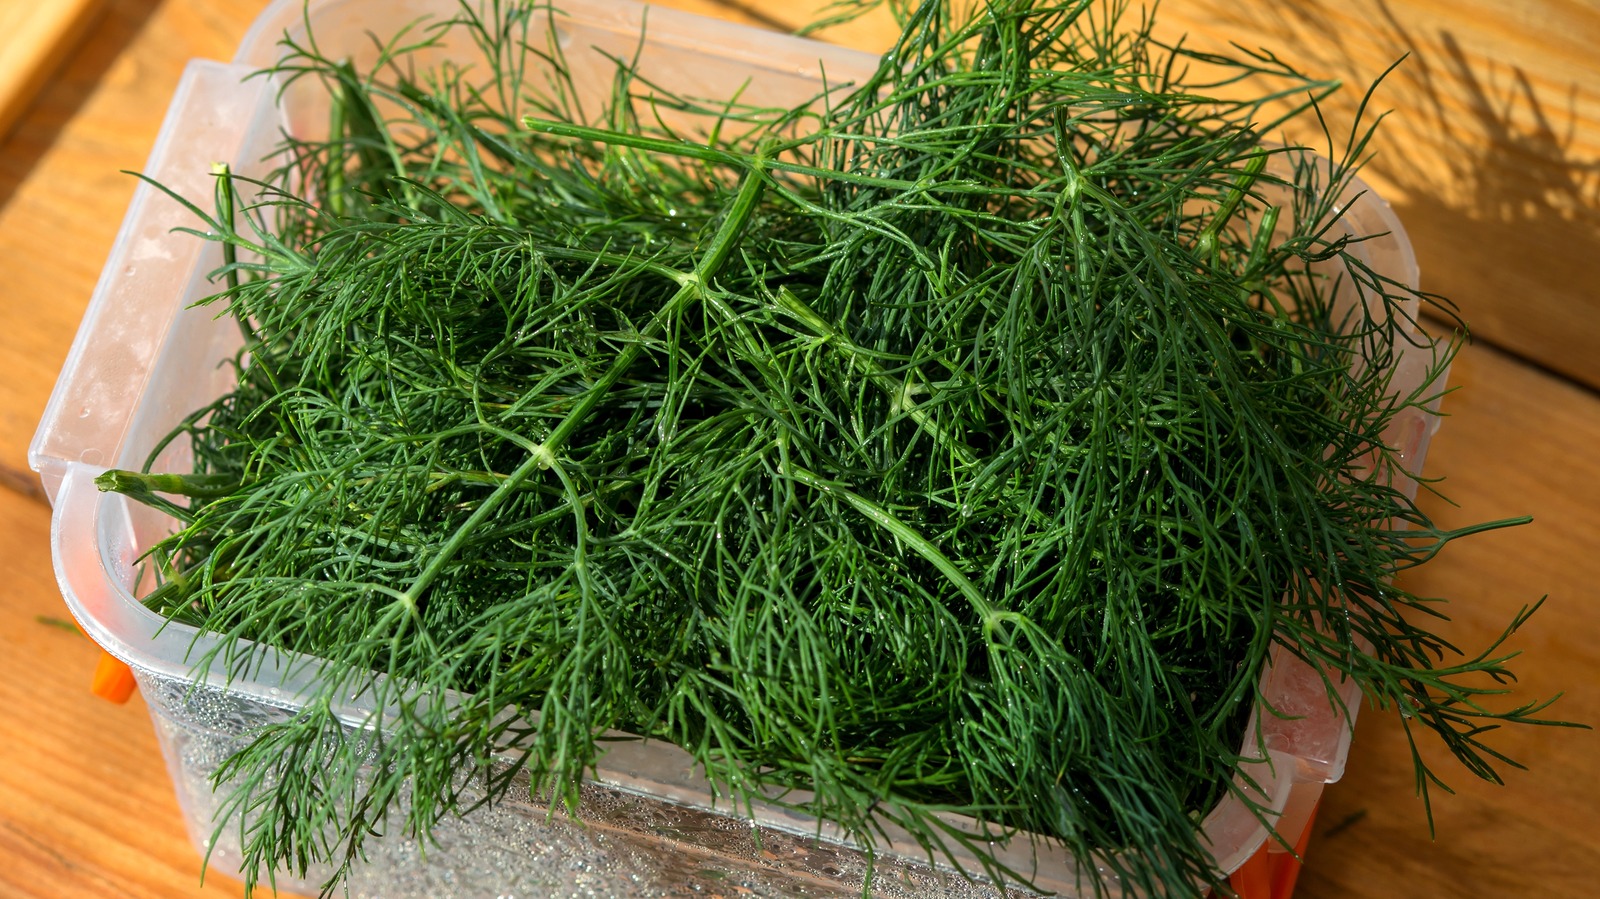 https://www.tastingtable.com/img/gallery/the-absolute-best-ways-to-keep-dill-fresh/l-intro-1650386883.jpg